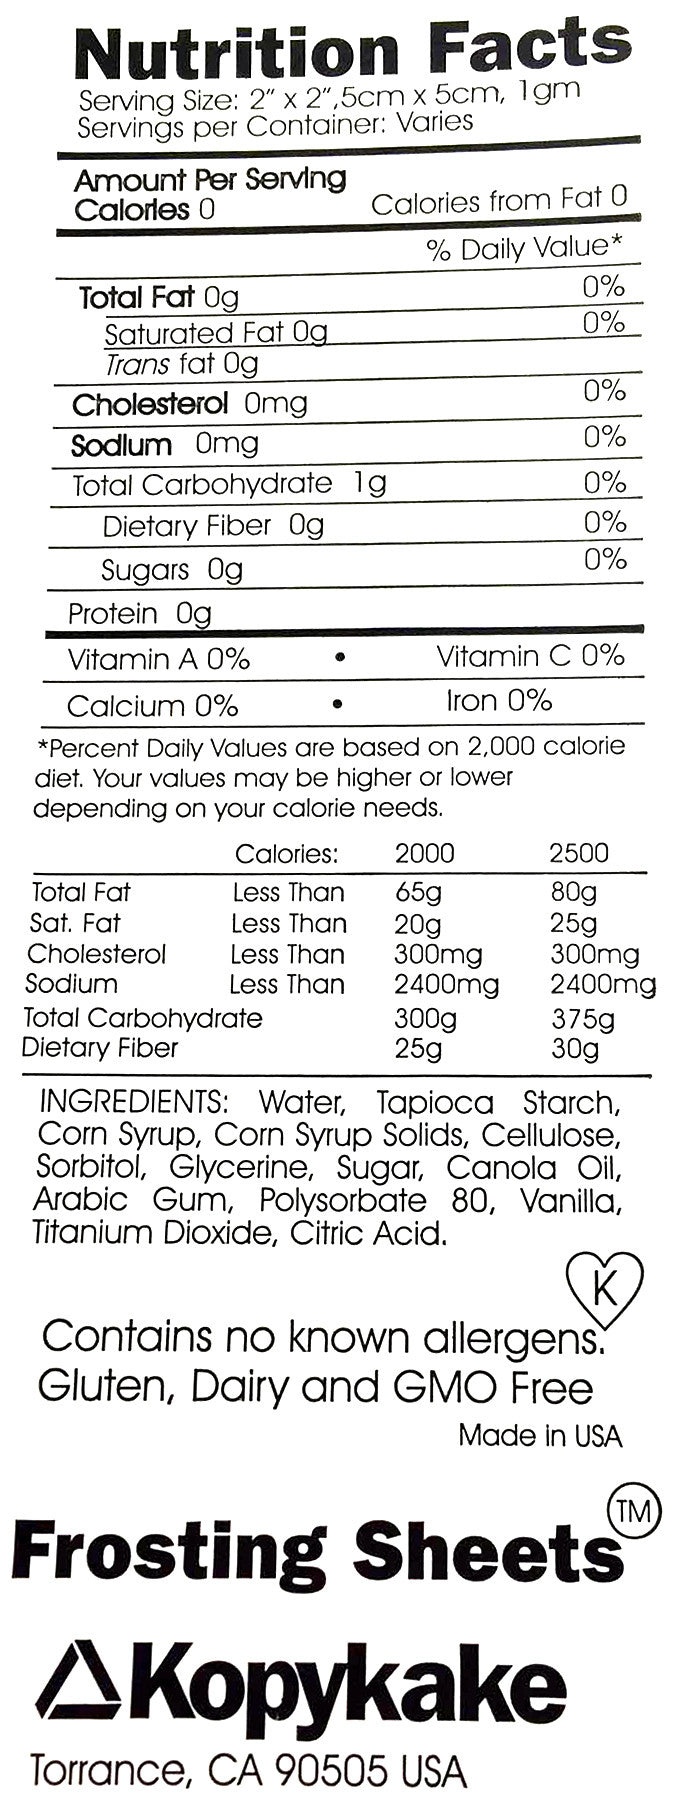 Instructions, Nutrition Facts, Kosher Certificat for edible shelf (not for sell, just info) - Edible Prints On Cake (Edible Cake &Cupcake Topper)